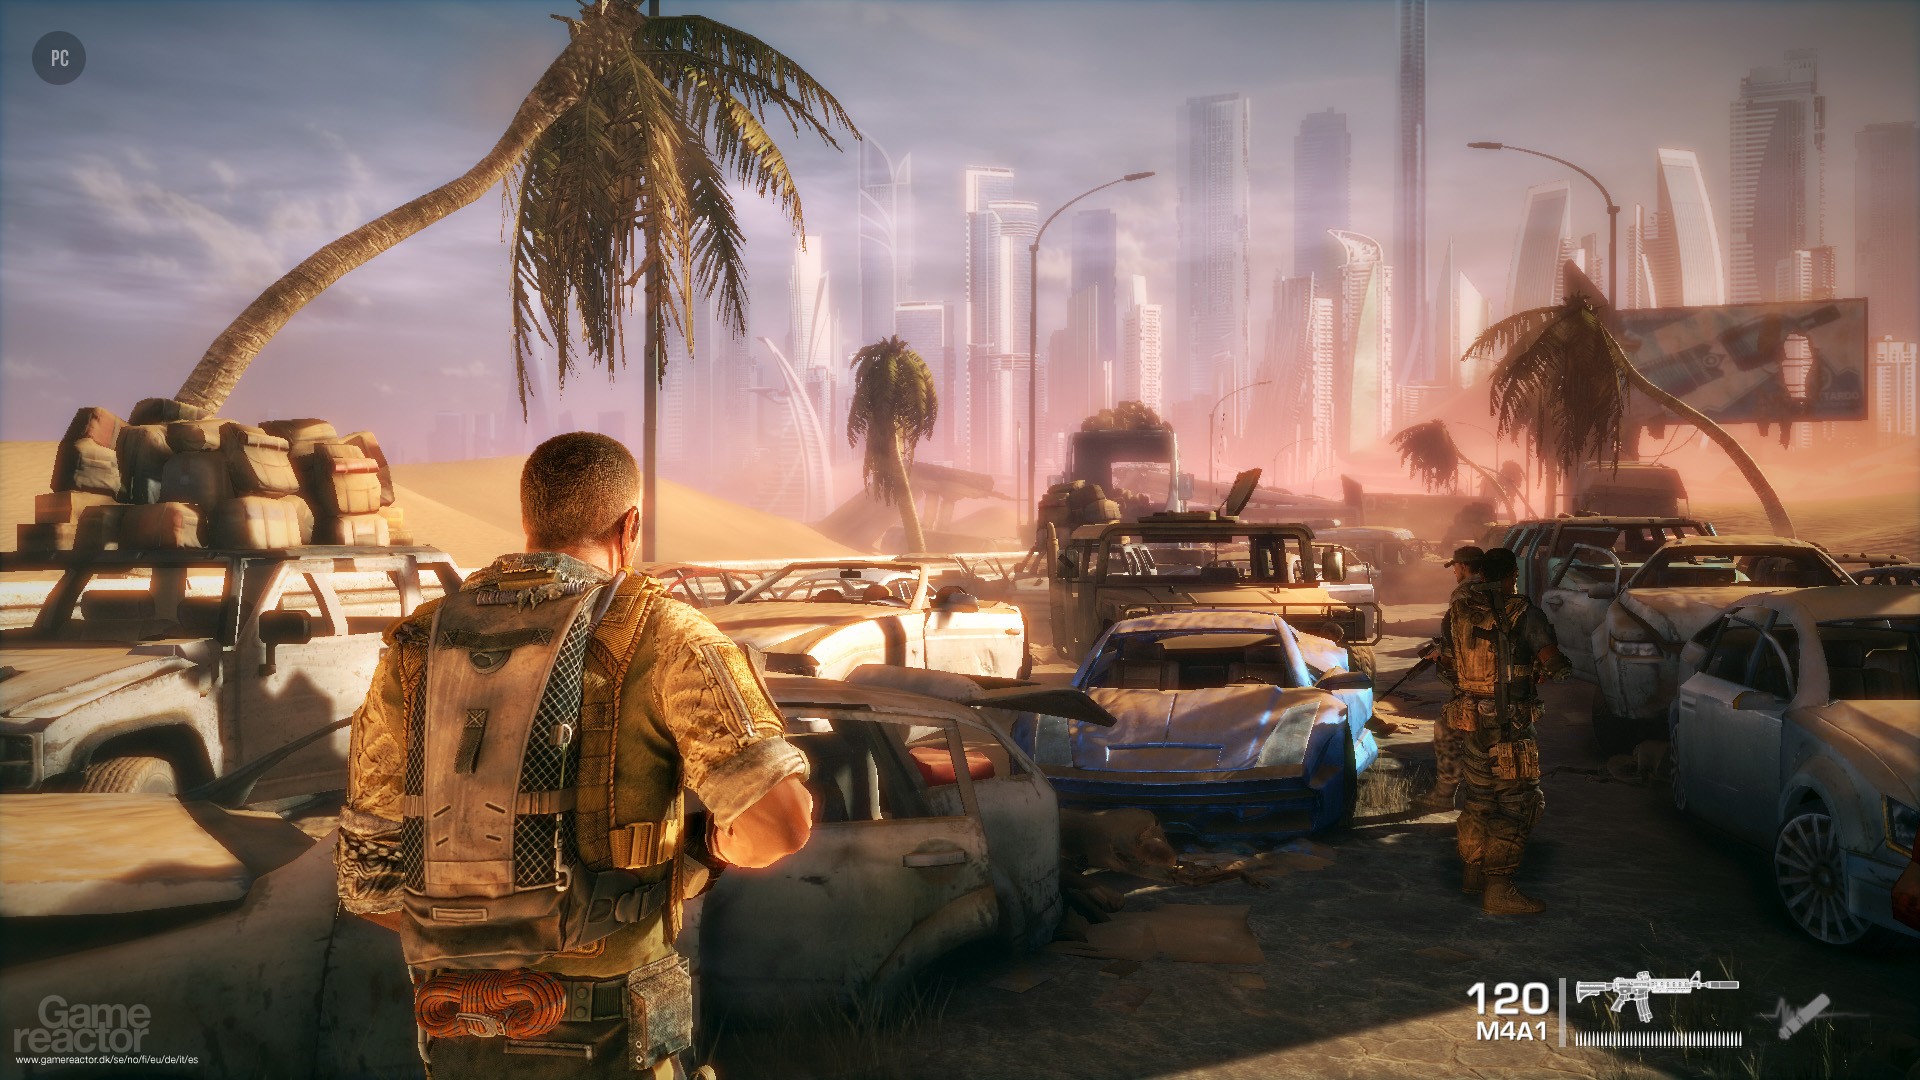 Line gameplay. Spec ops: the line. Spec ops the line геймплей. Spec ops the line Gameplay. Spec ops the line Дубай арт.